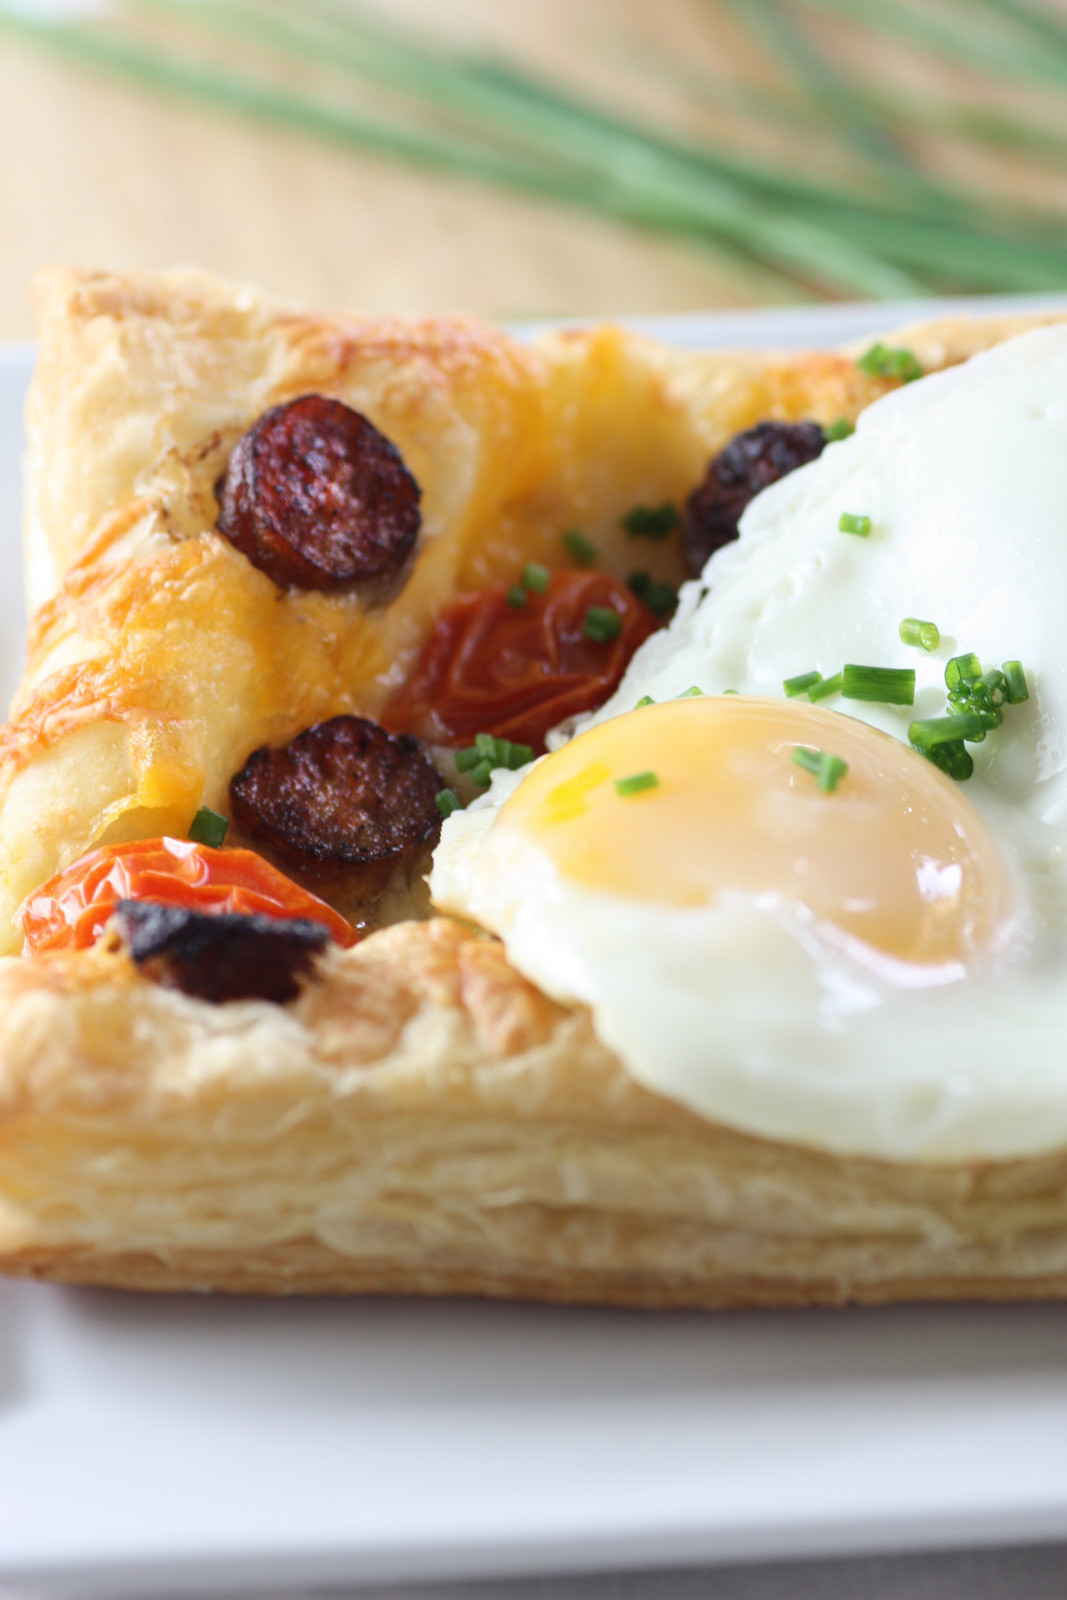 Breakfast Pastries Recipes
 Sausage and Egg Breakfast Pastry Recipe